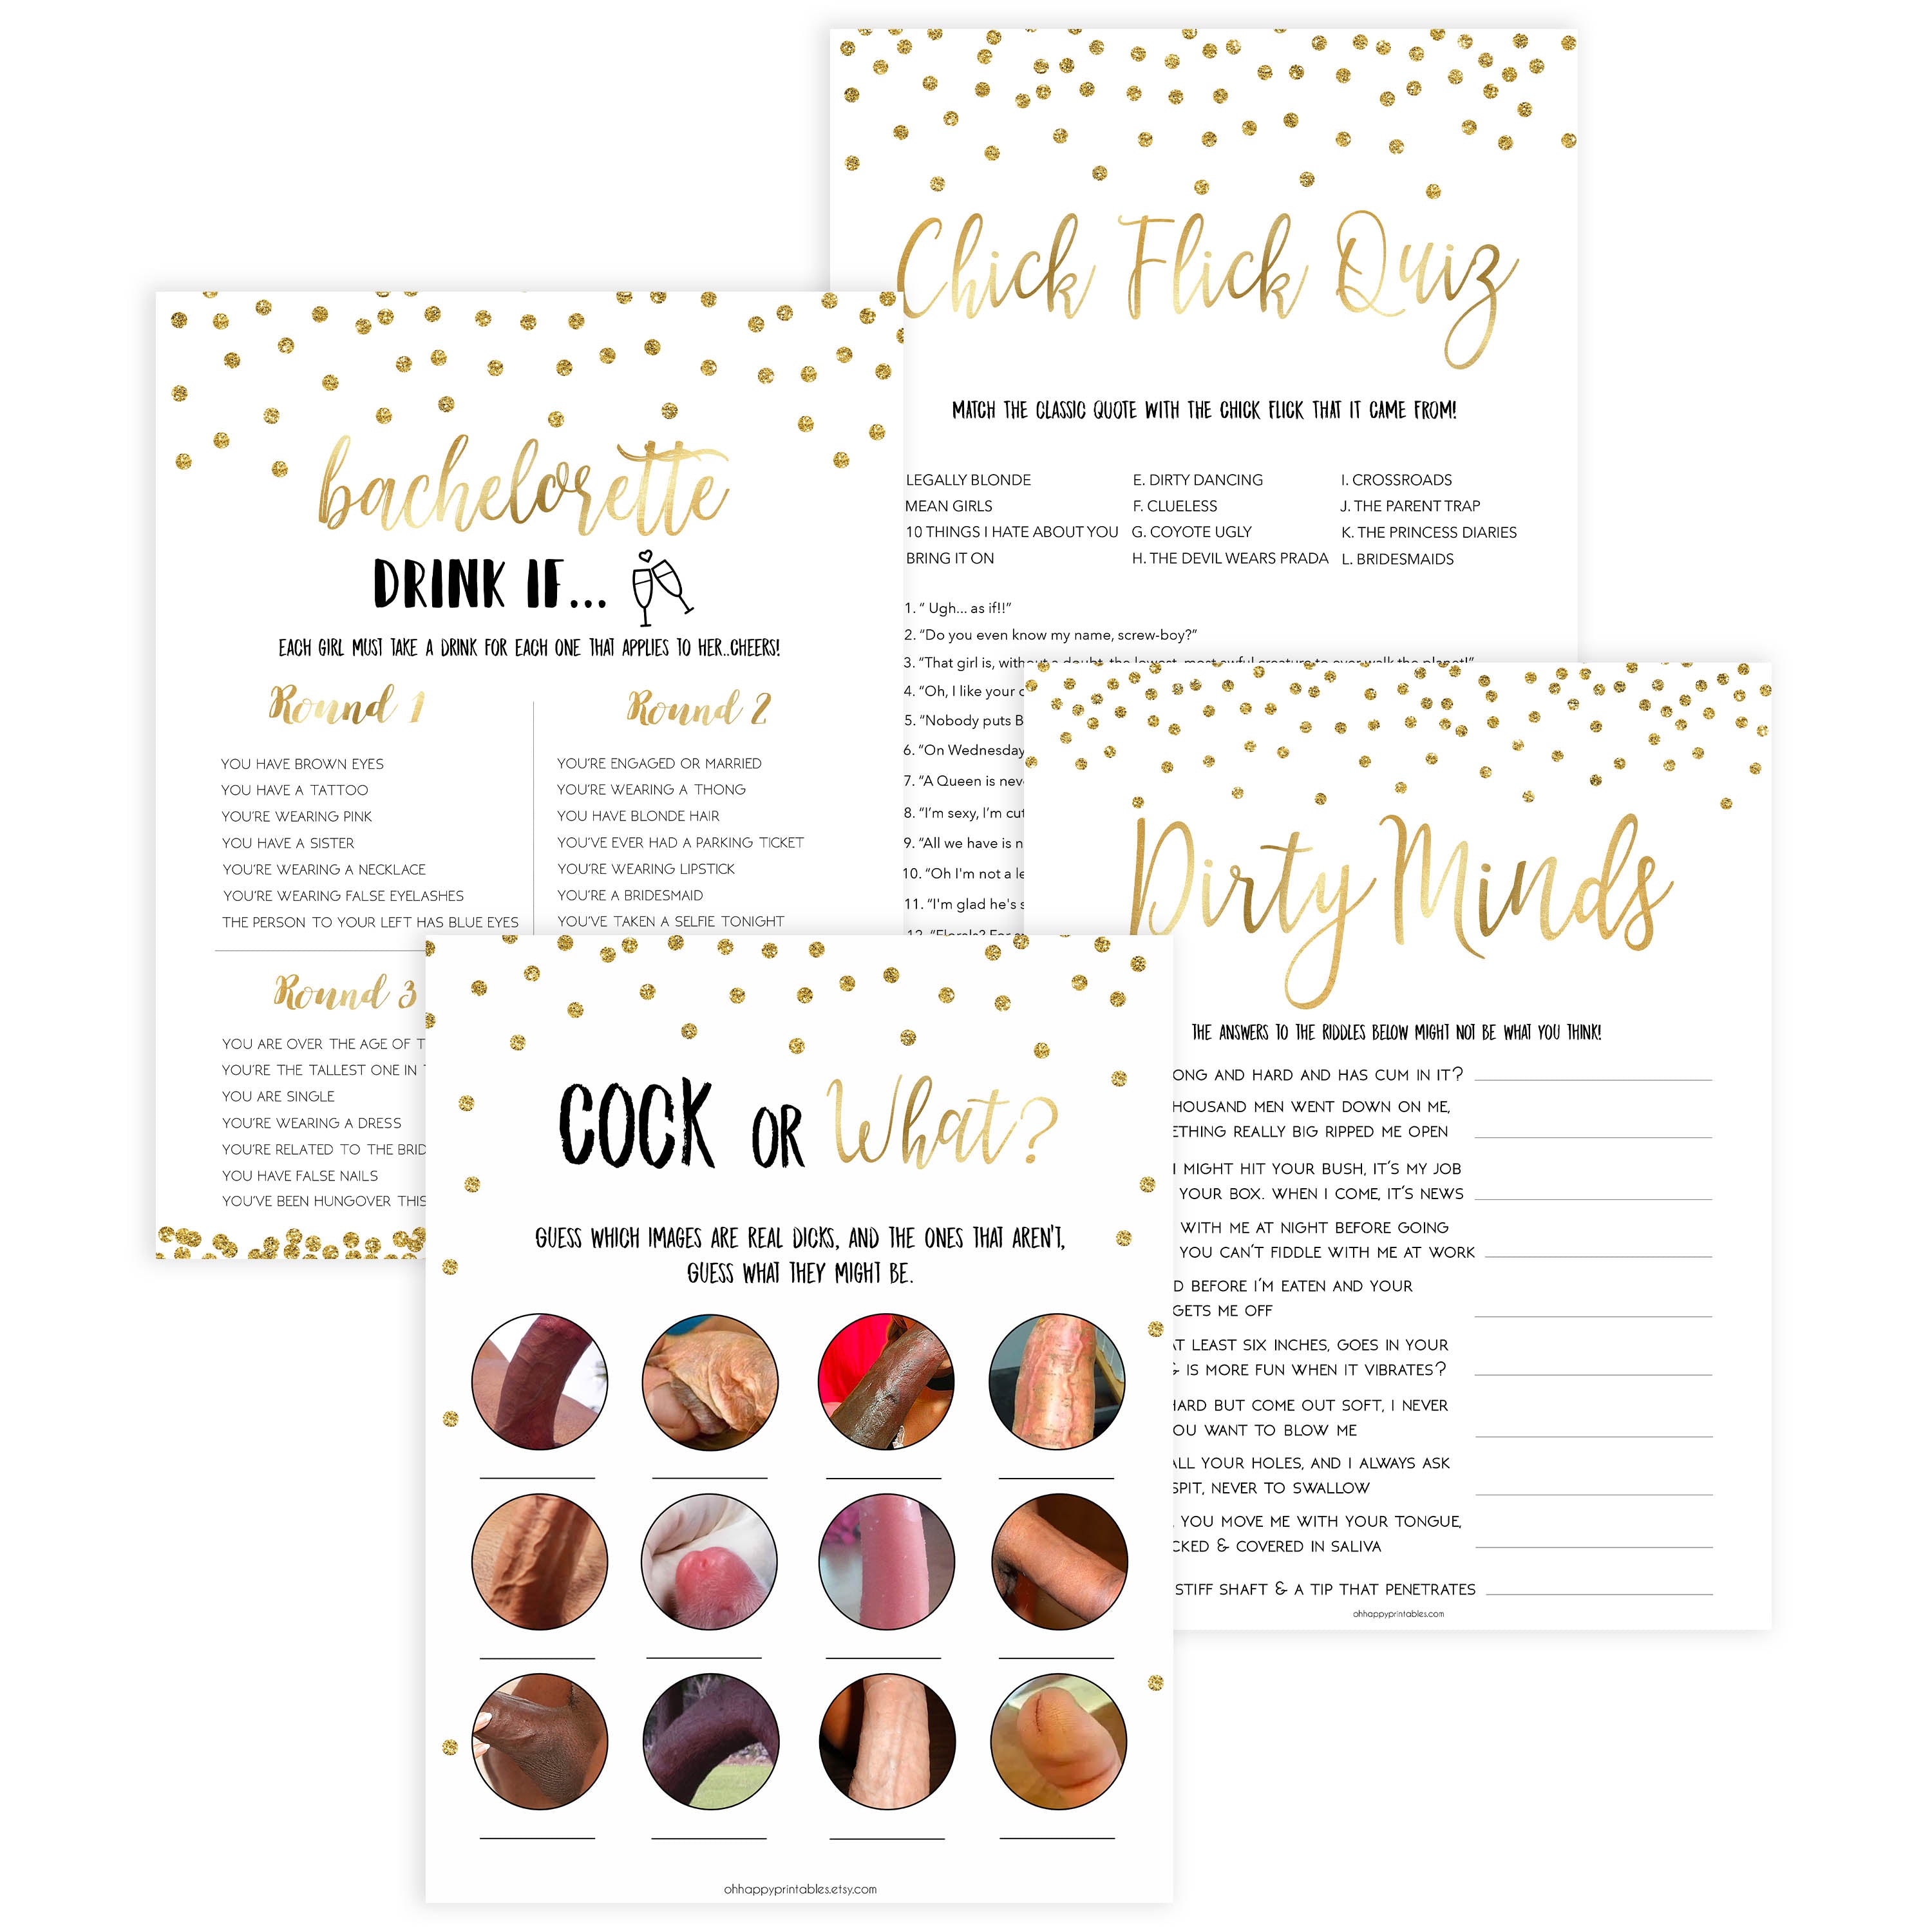 bachelorette games, naughty adult games, bridal shower games, cock or what games, adult bridal shower games, printable bridal shower games